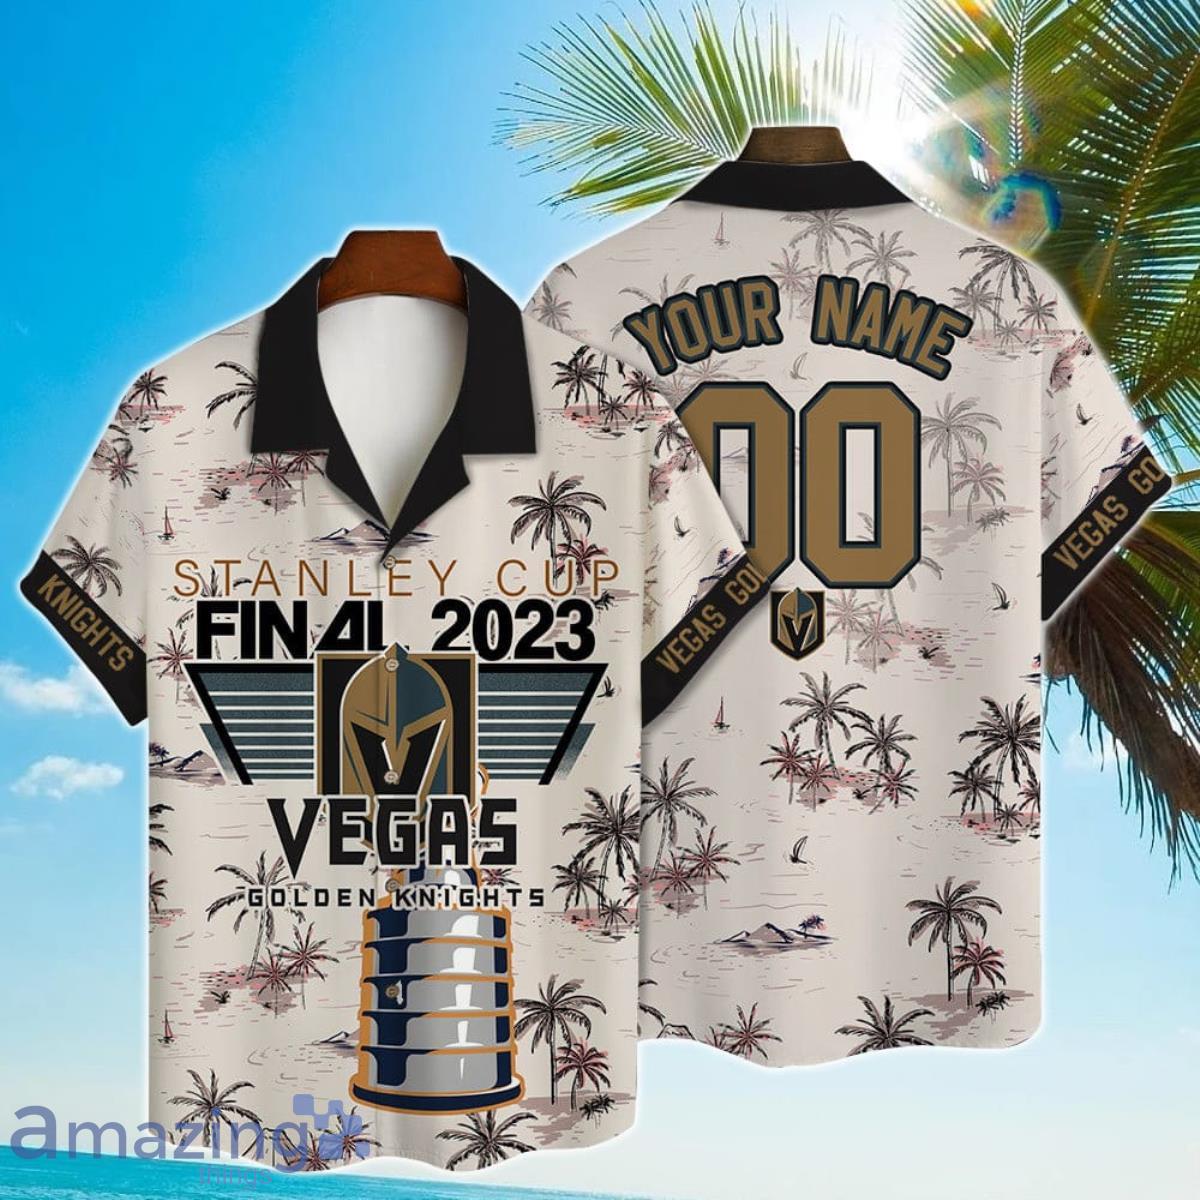 https://image.whatamazingthings.com/2023-06/vegas-golden-knights-nhl-champions-hawaiian-shirt-personalized-for-real-fans.jpg